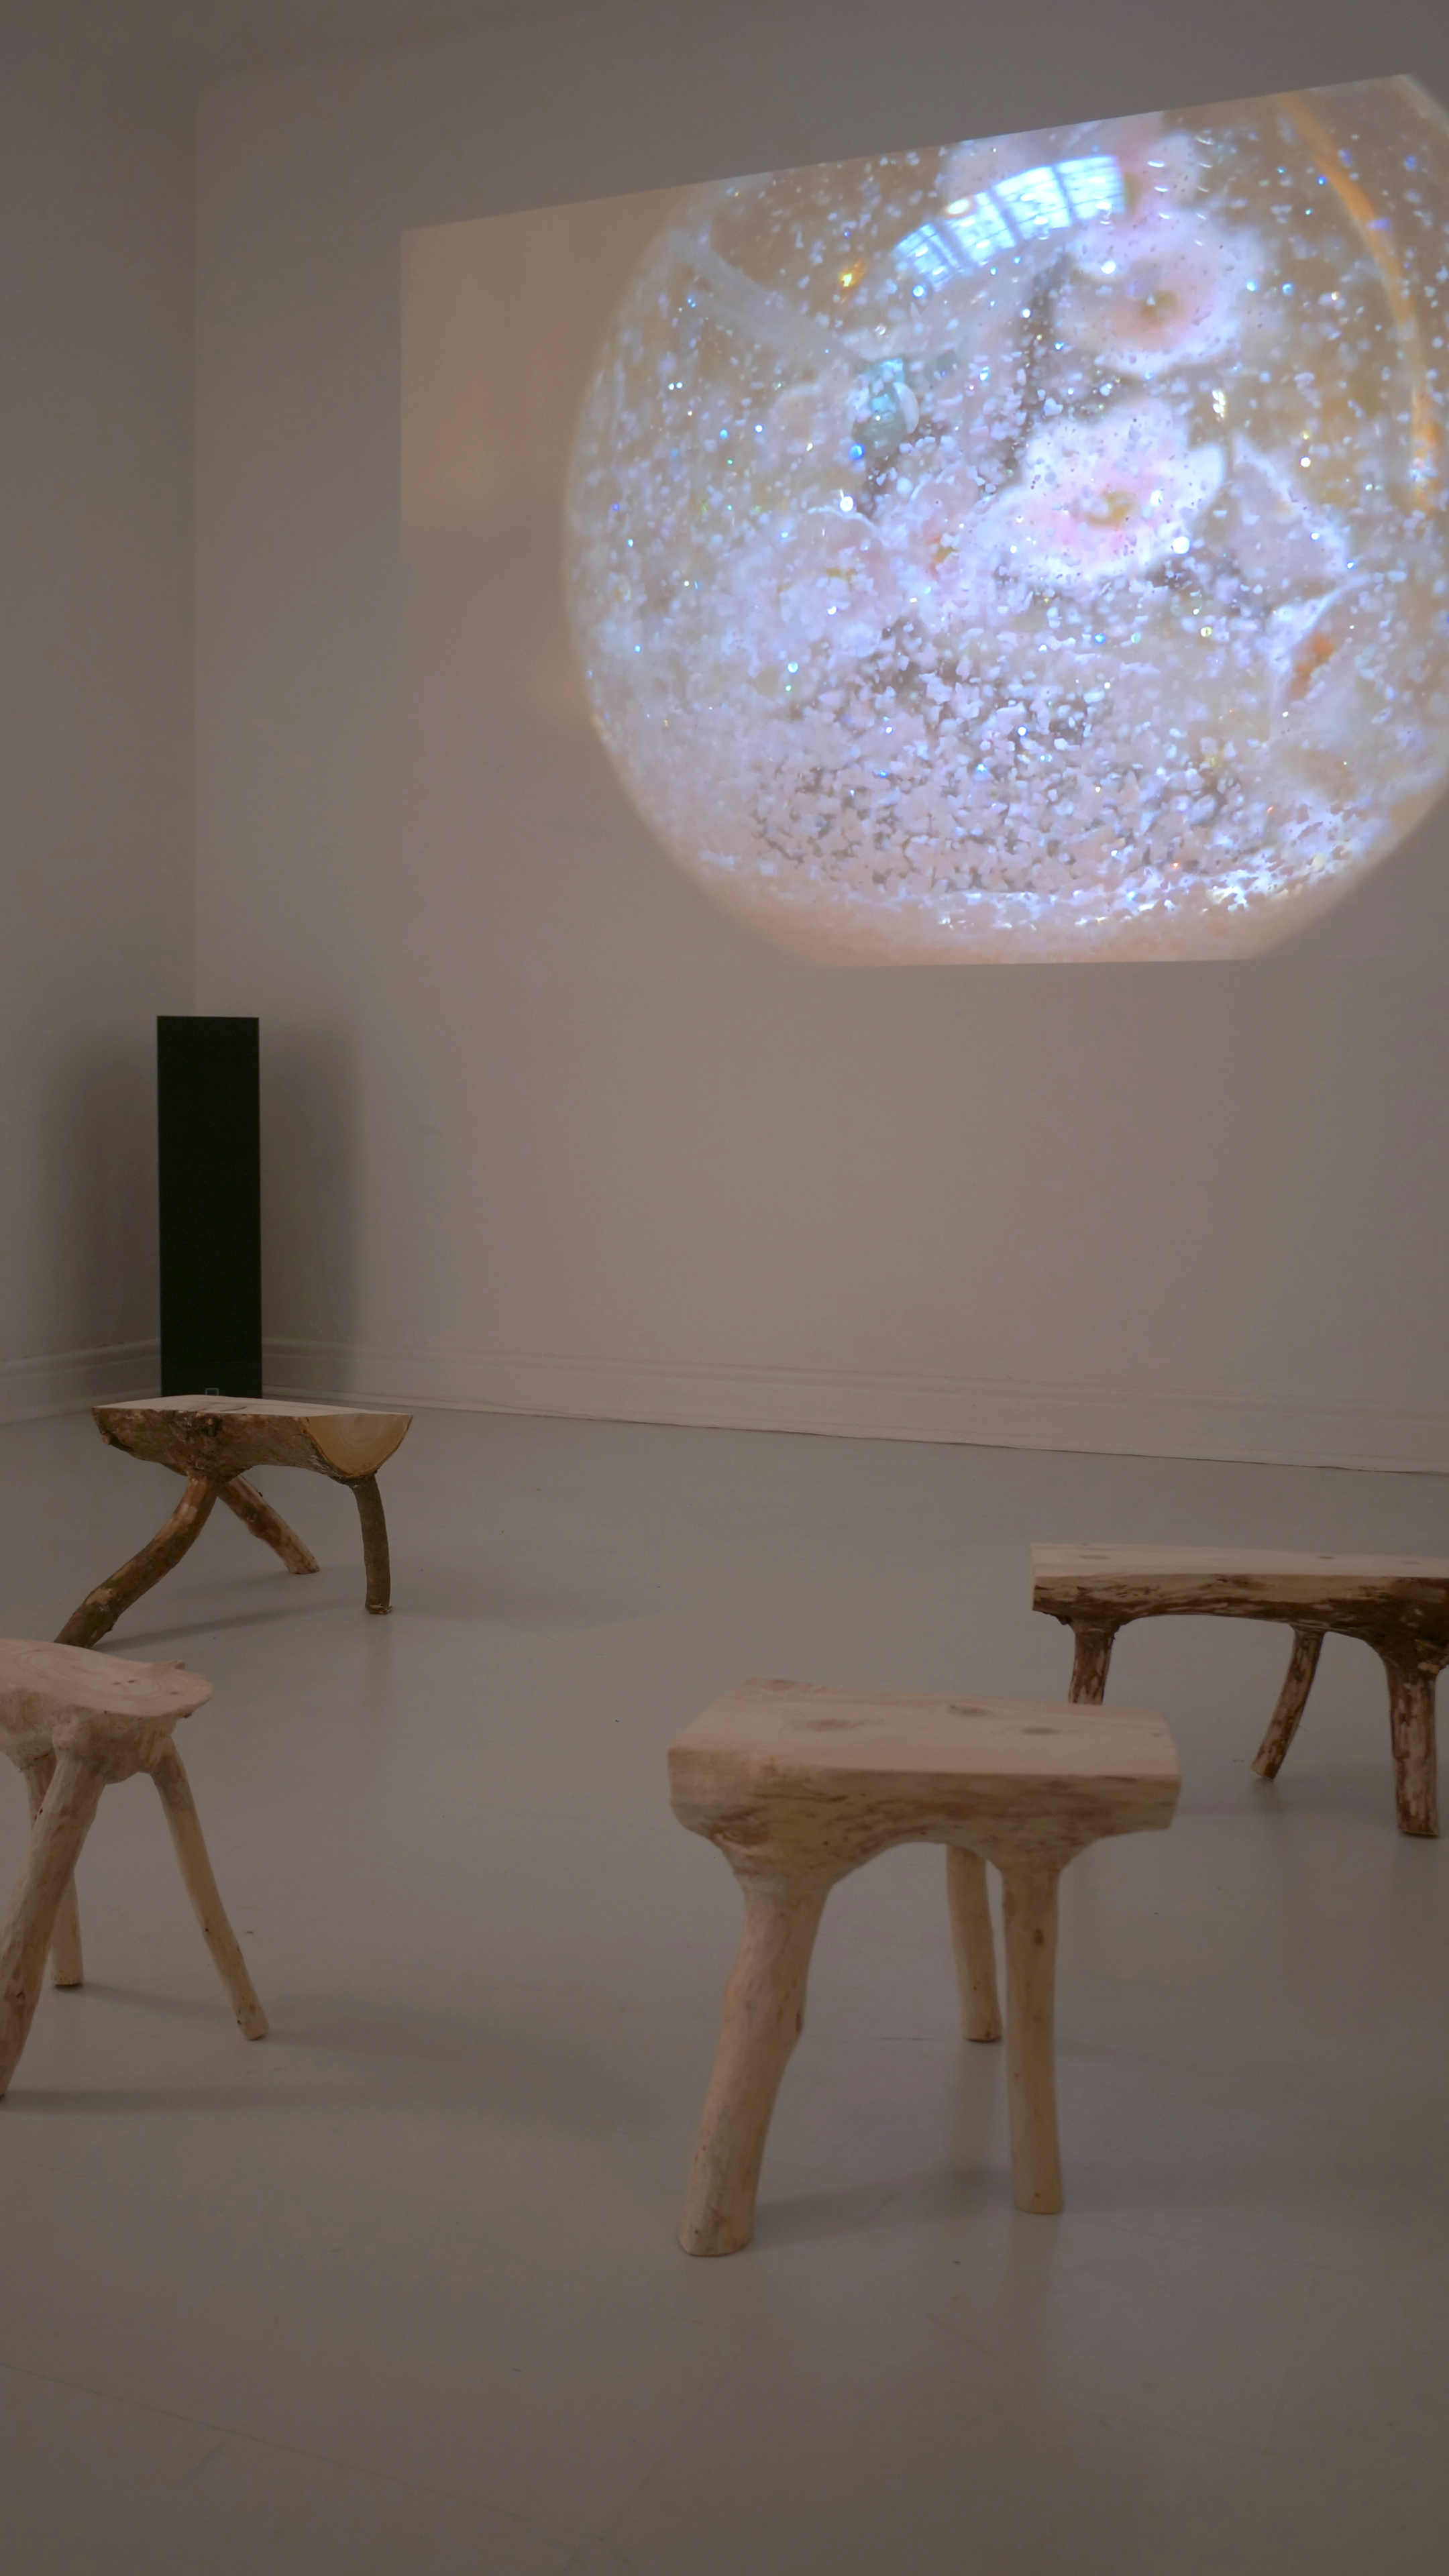 Installation view: Video and wooden stools (based on pre-industrial furniture taken directly from the shape of the tree).